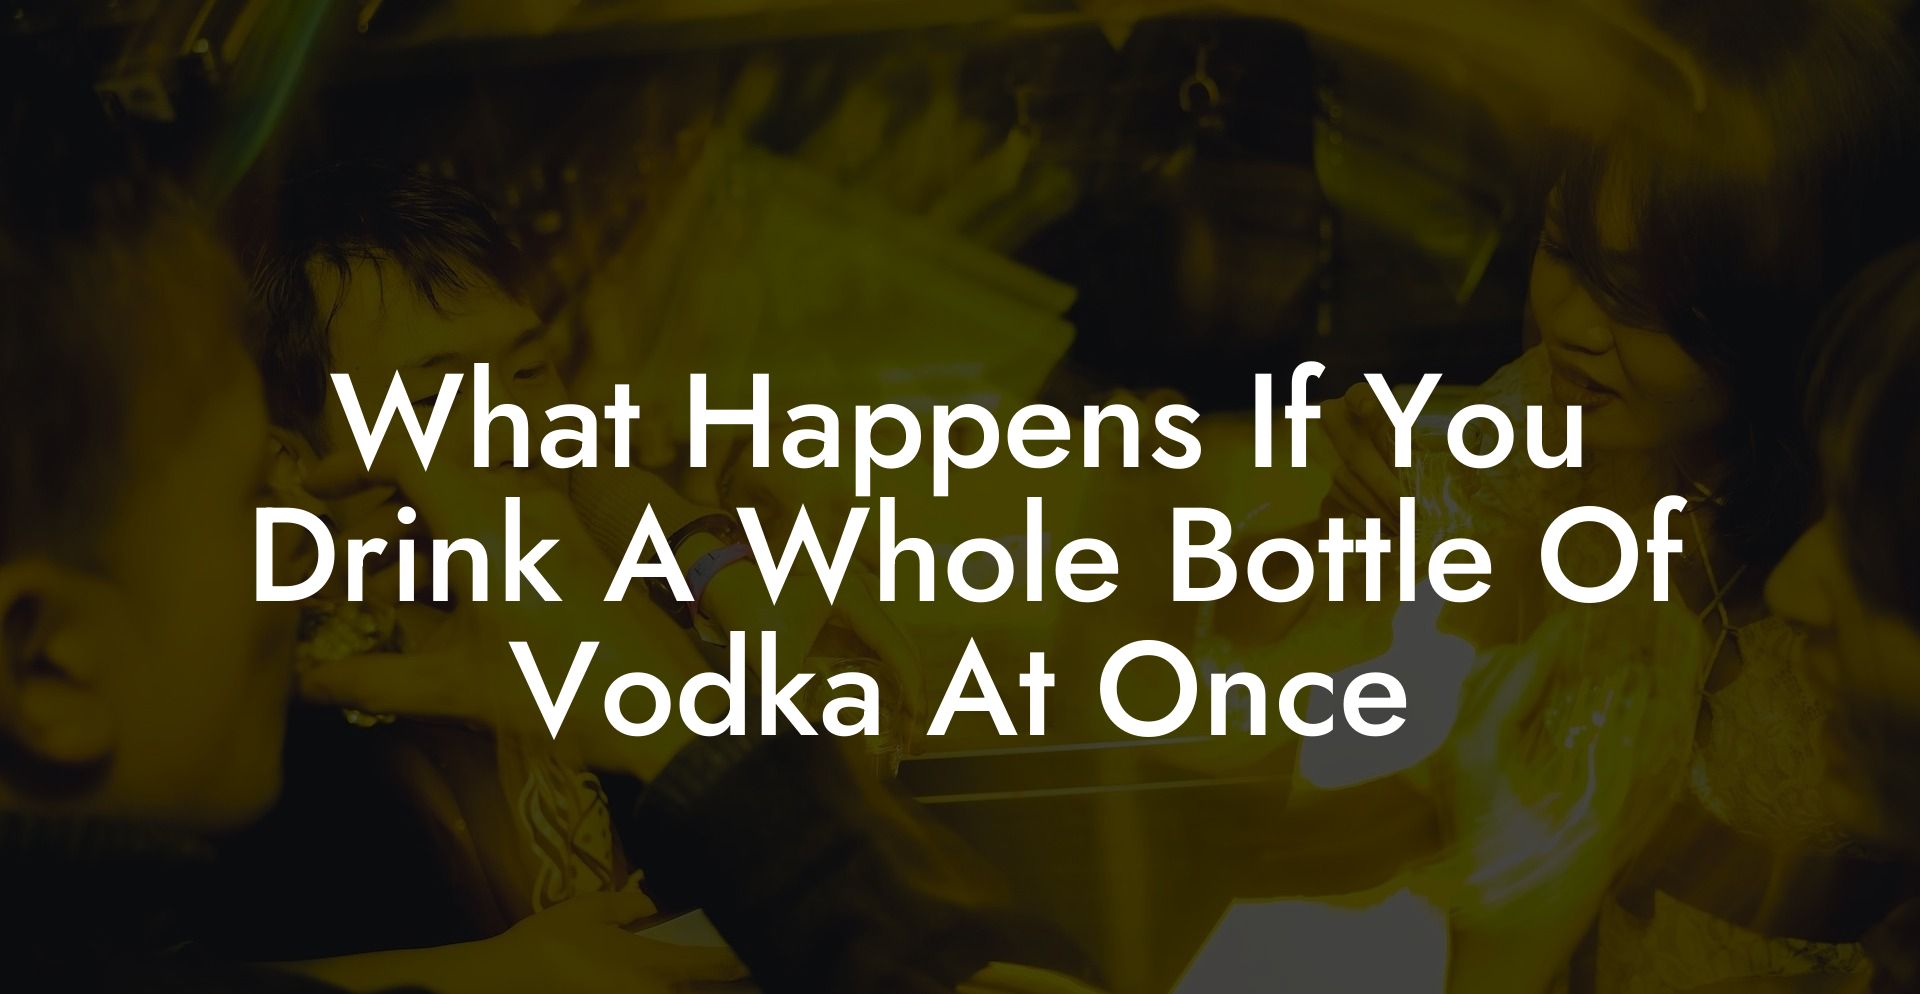 What Happens If You Drink A Whole Bottle Of Vodka At Once